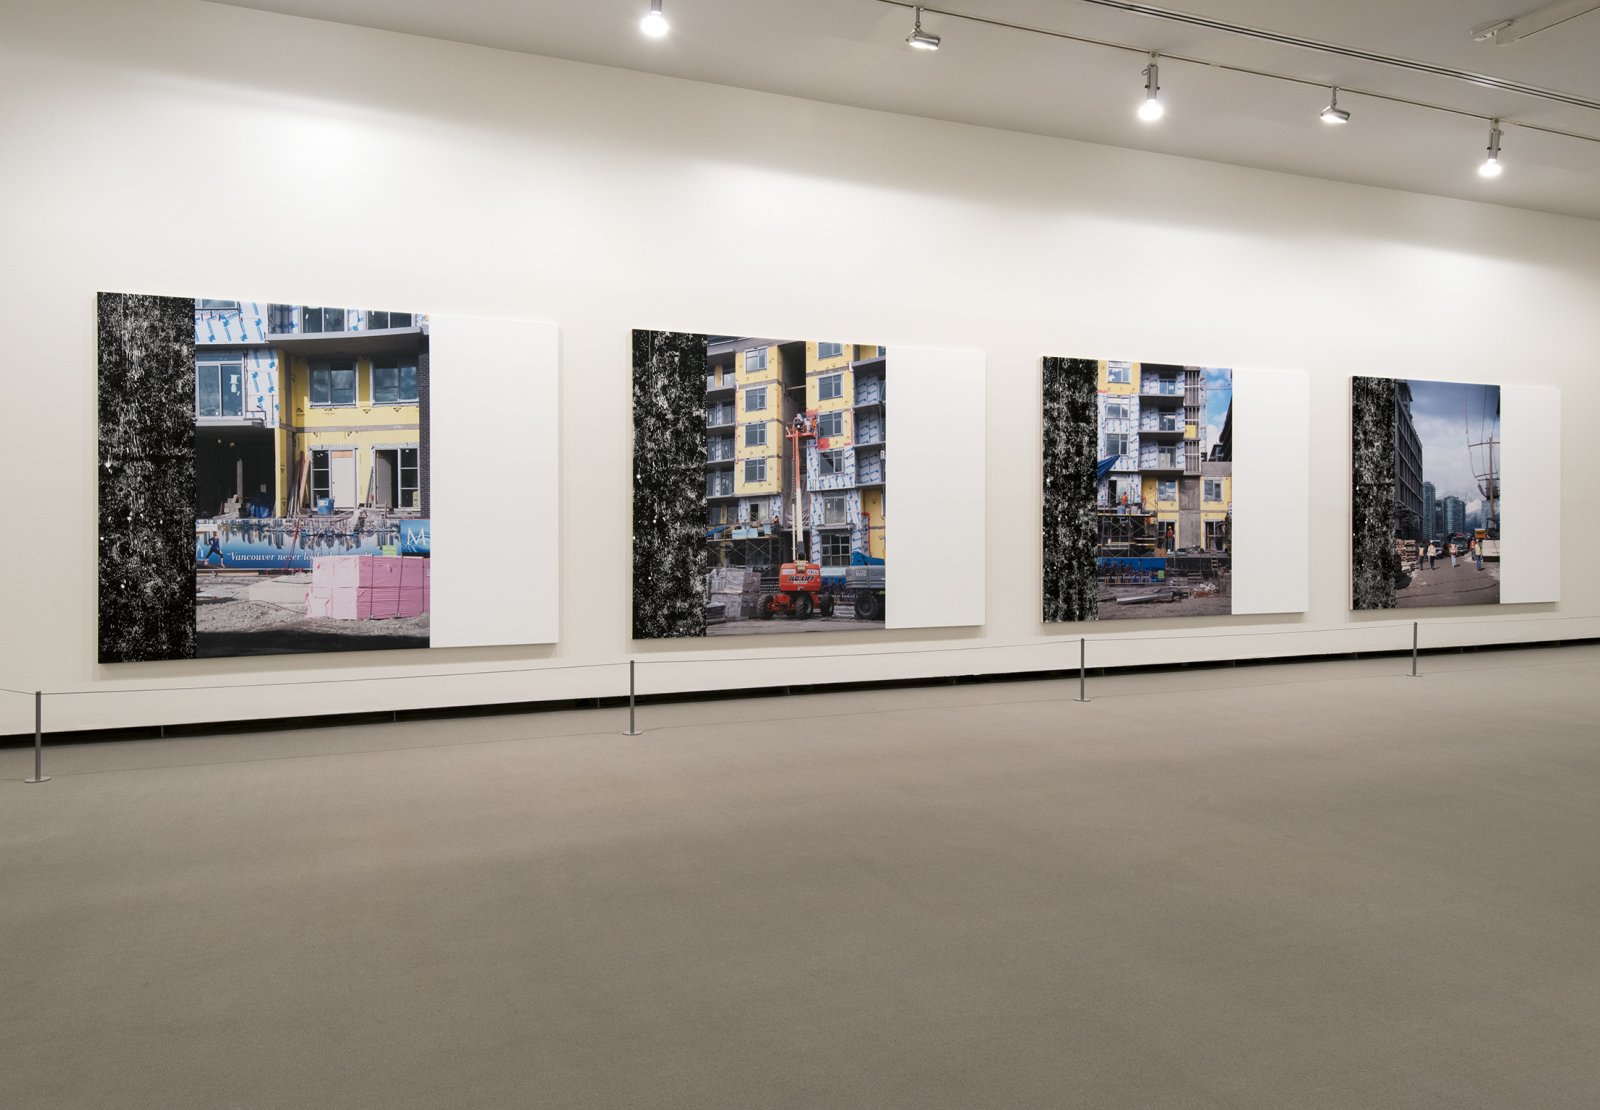 ​Ian Wallace, installation view, A Literature of Images, Vancouver Art Gallery, 2012​ by Ian Wallace